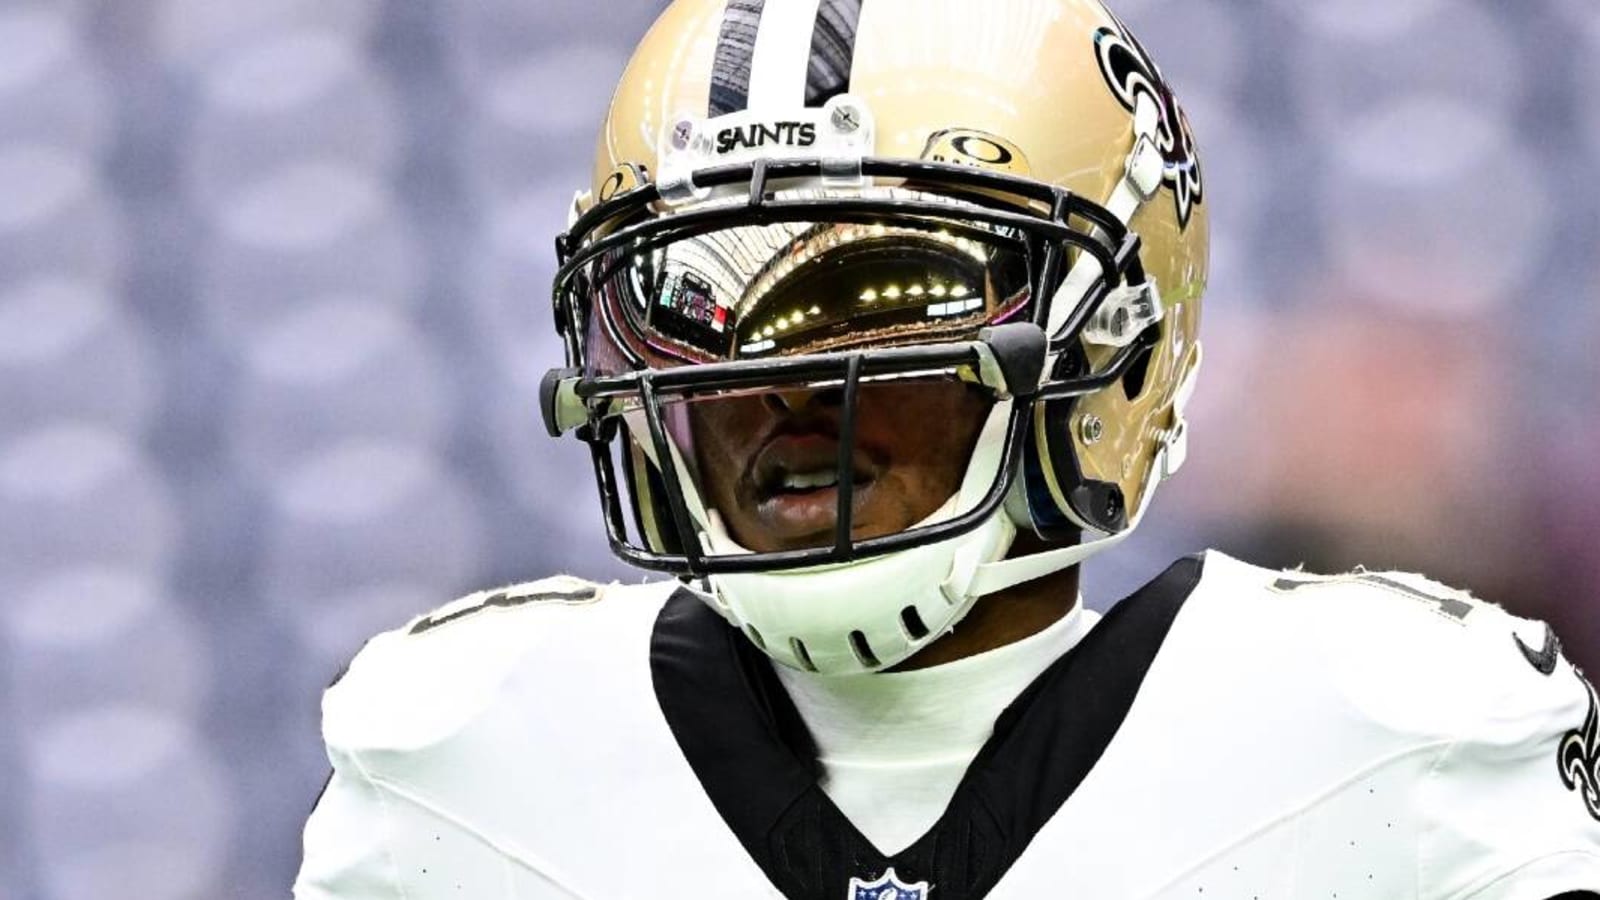 Saints WR Michael Thomas takes to social media after being detained by police